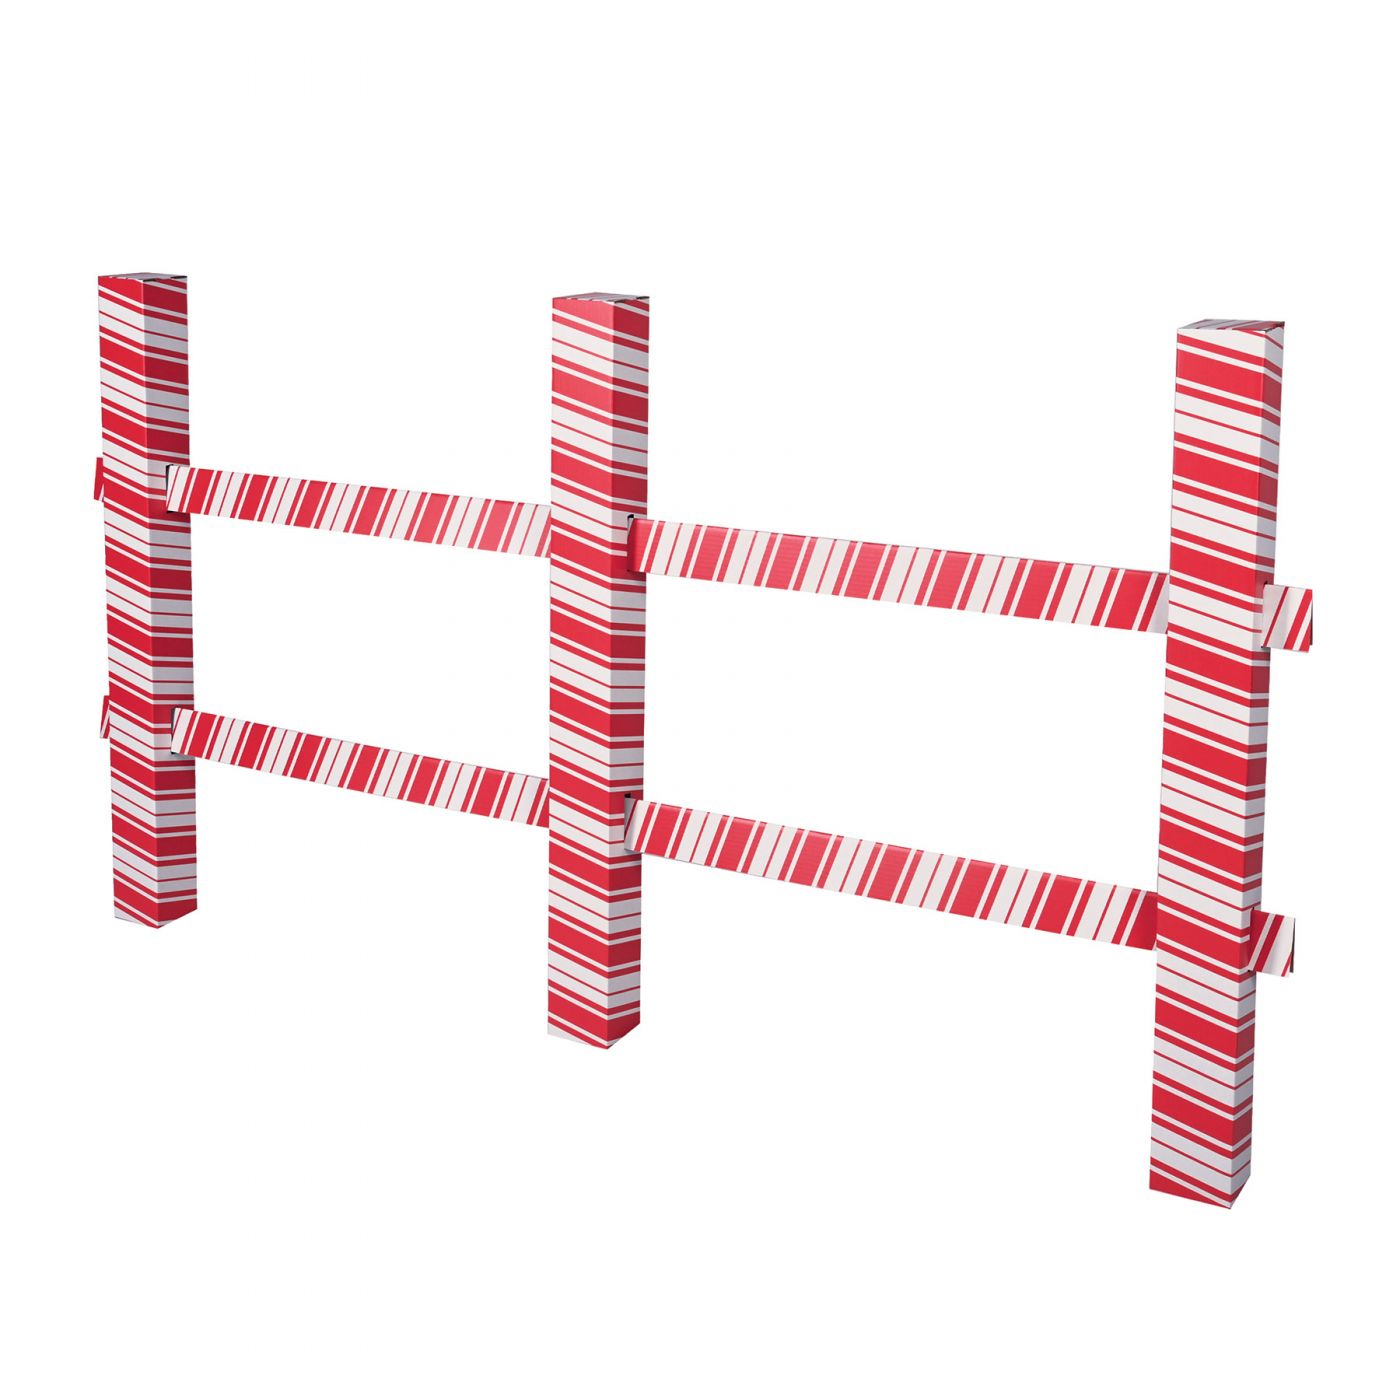 3-D Candy Cane Fence Prop (4) image